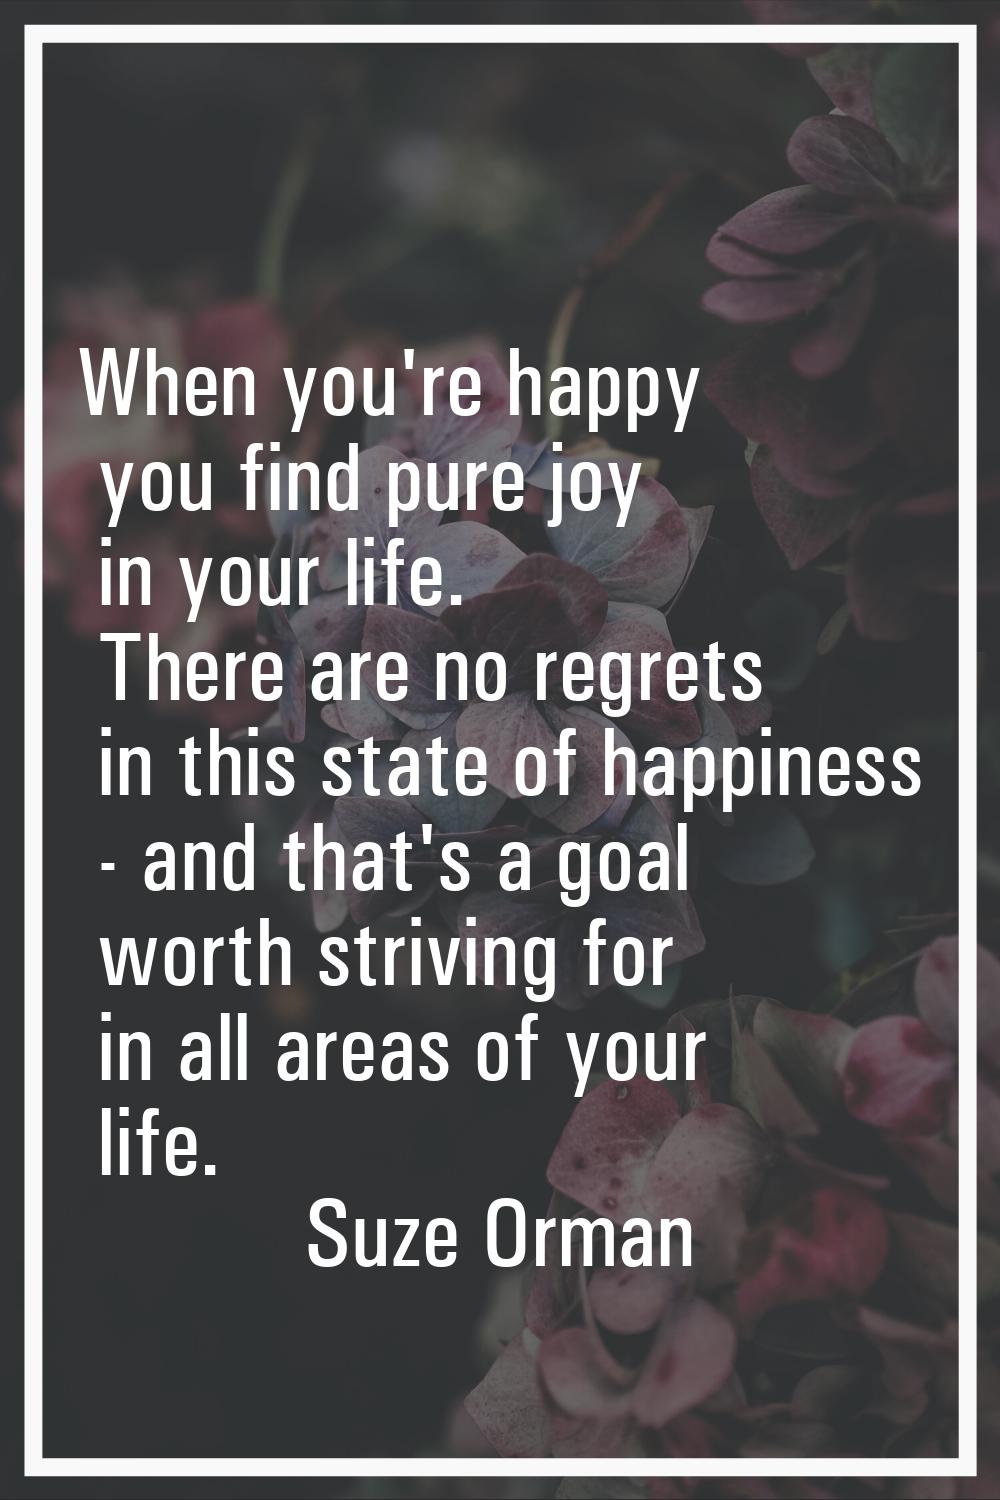 When you're happy you find pure joy in your life. There are no regrets in this state of happiness -